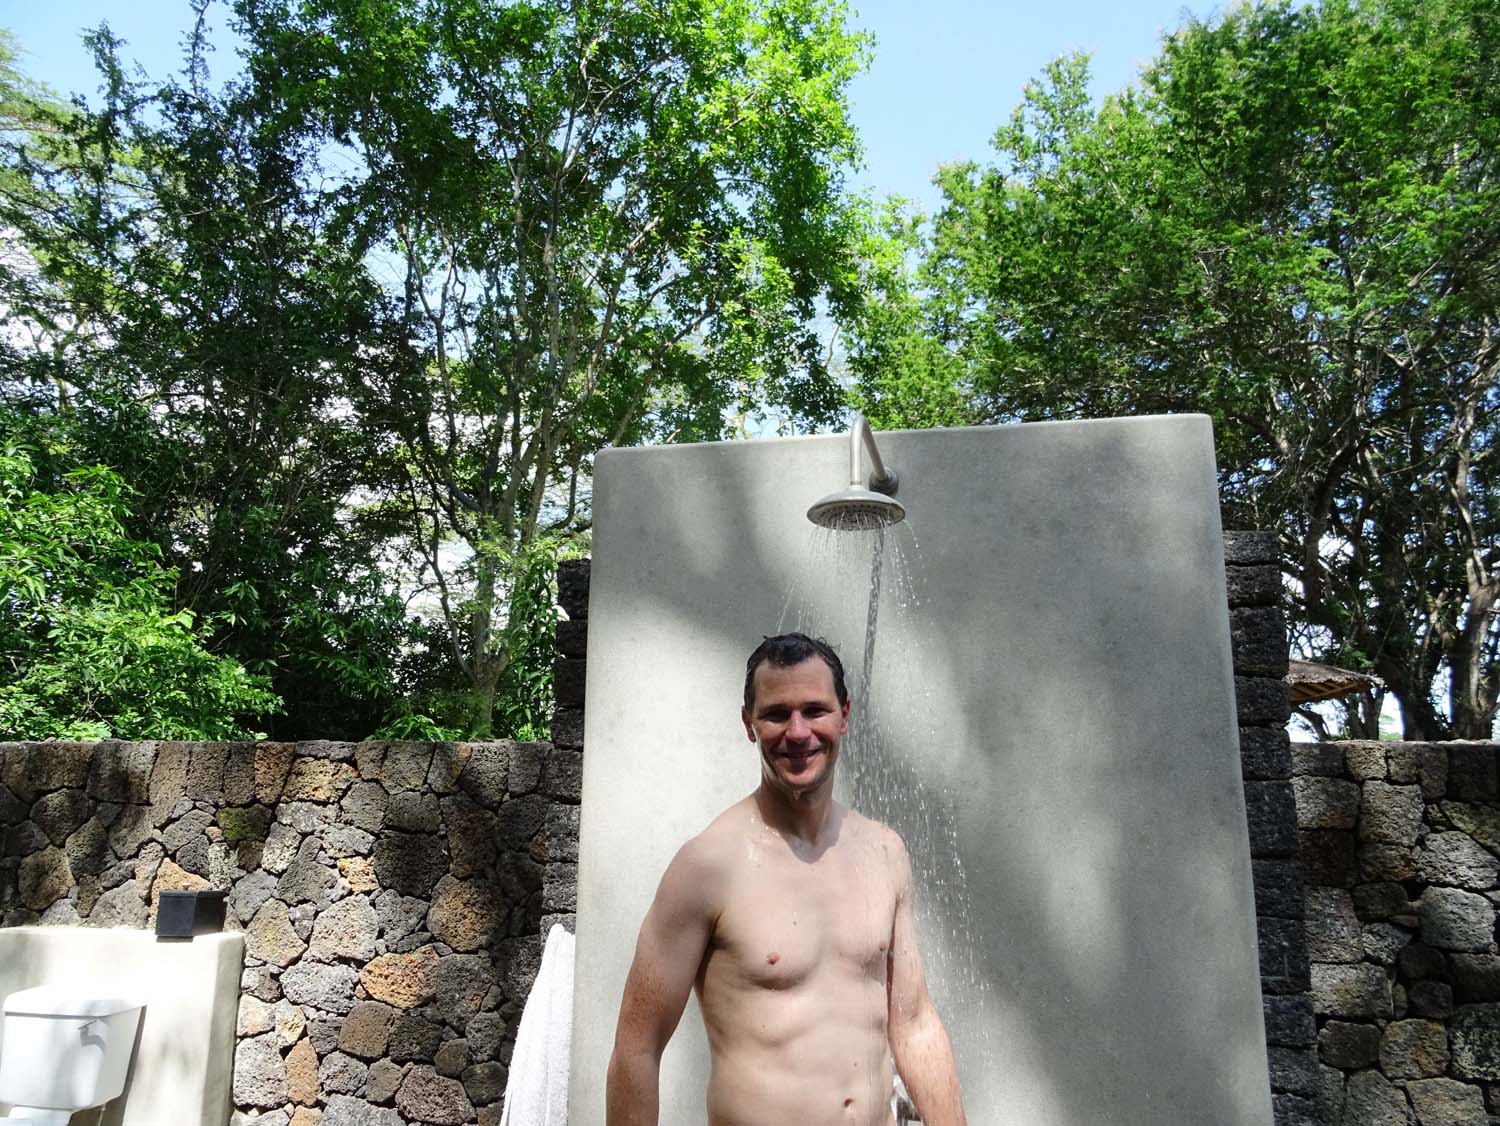 our outdoor shower, and yes, that is an outdoor toilet in the left corner!